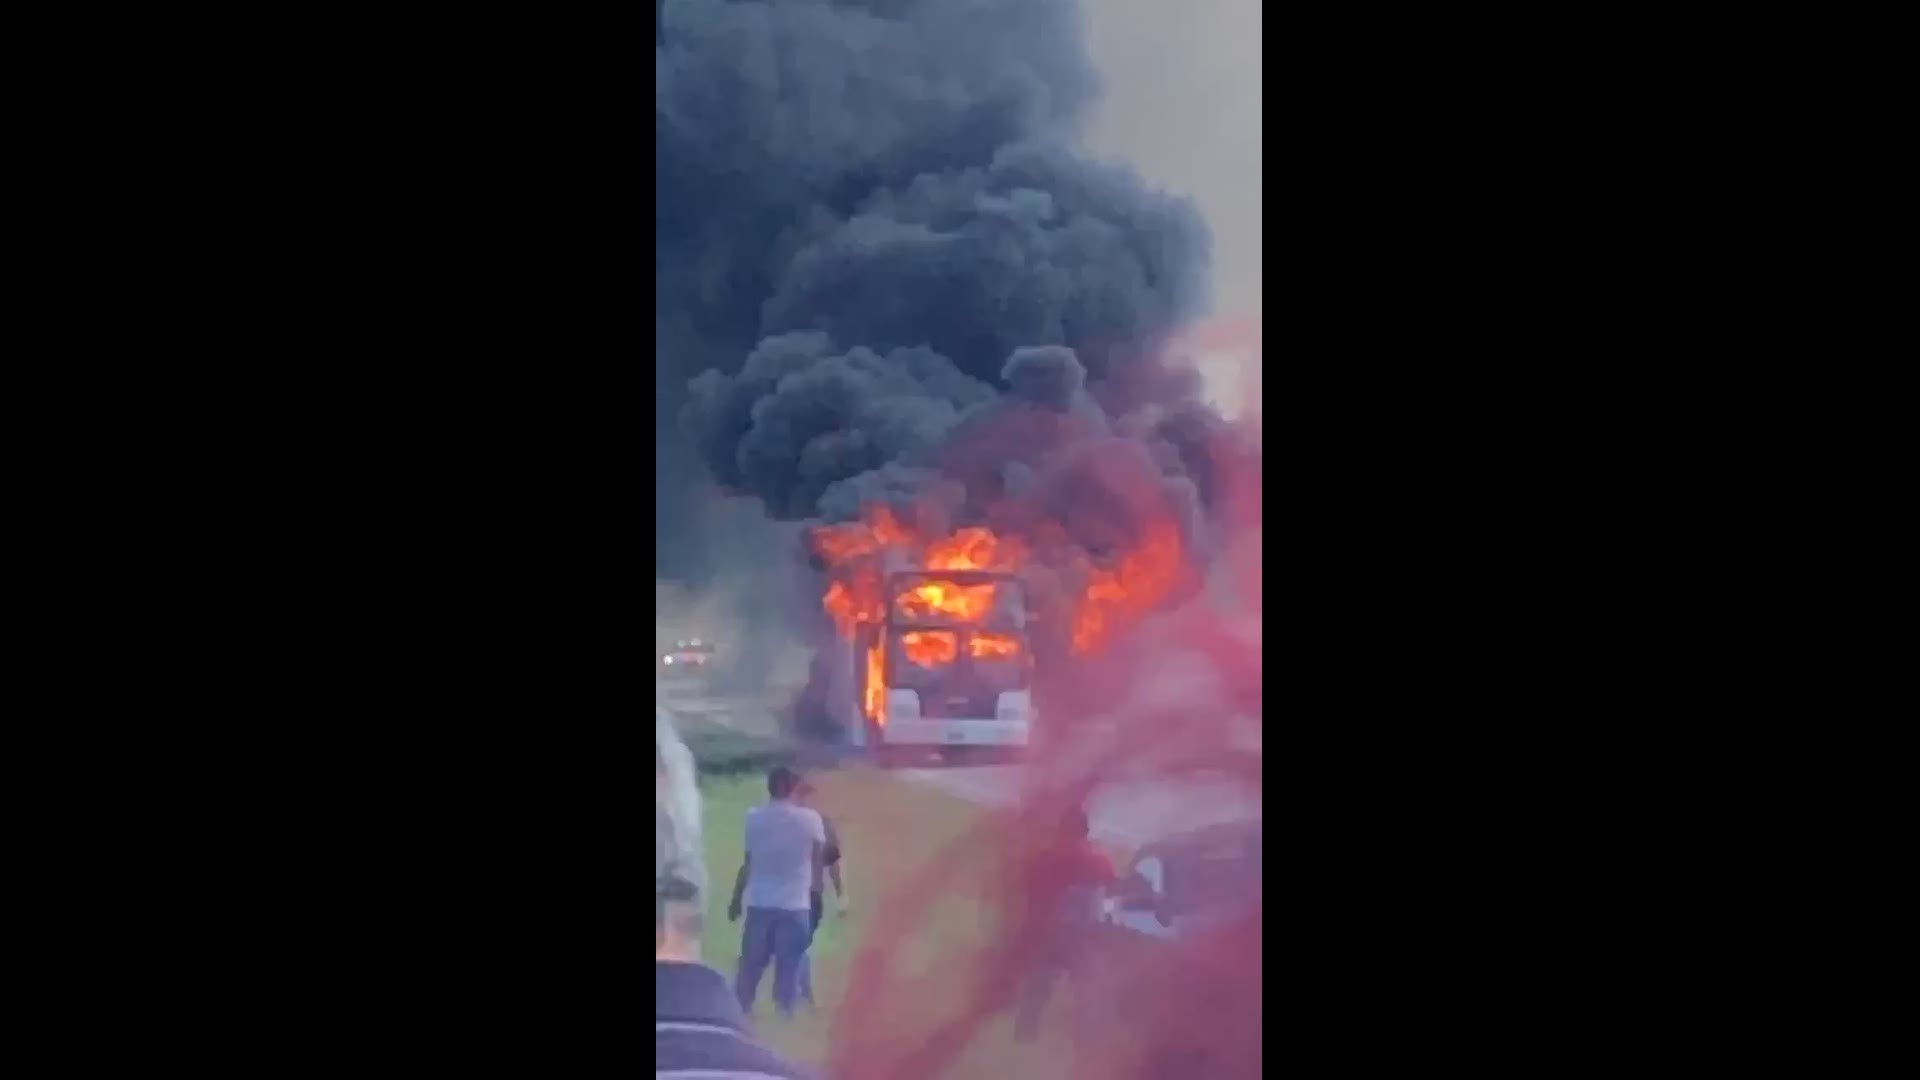 A parent says a bus carrying kids from summer camp back to San Antonio exploded in the Marble Falls area. The parent said no one was hurt in the explosion.